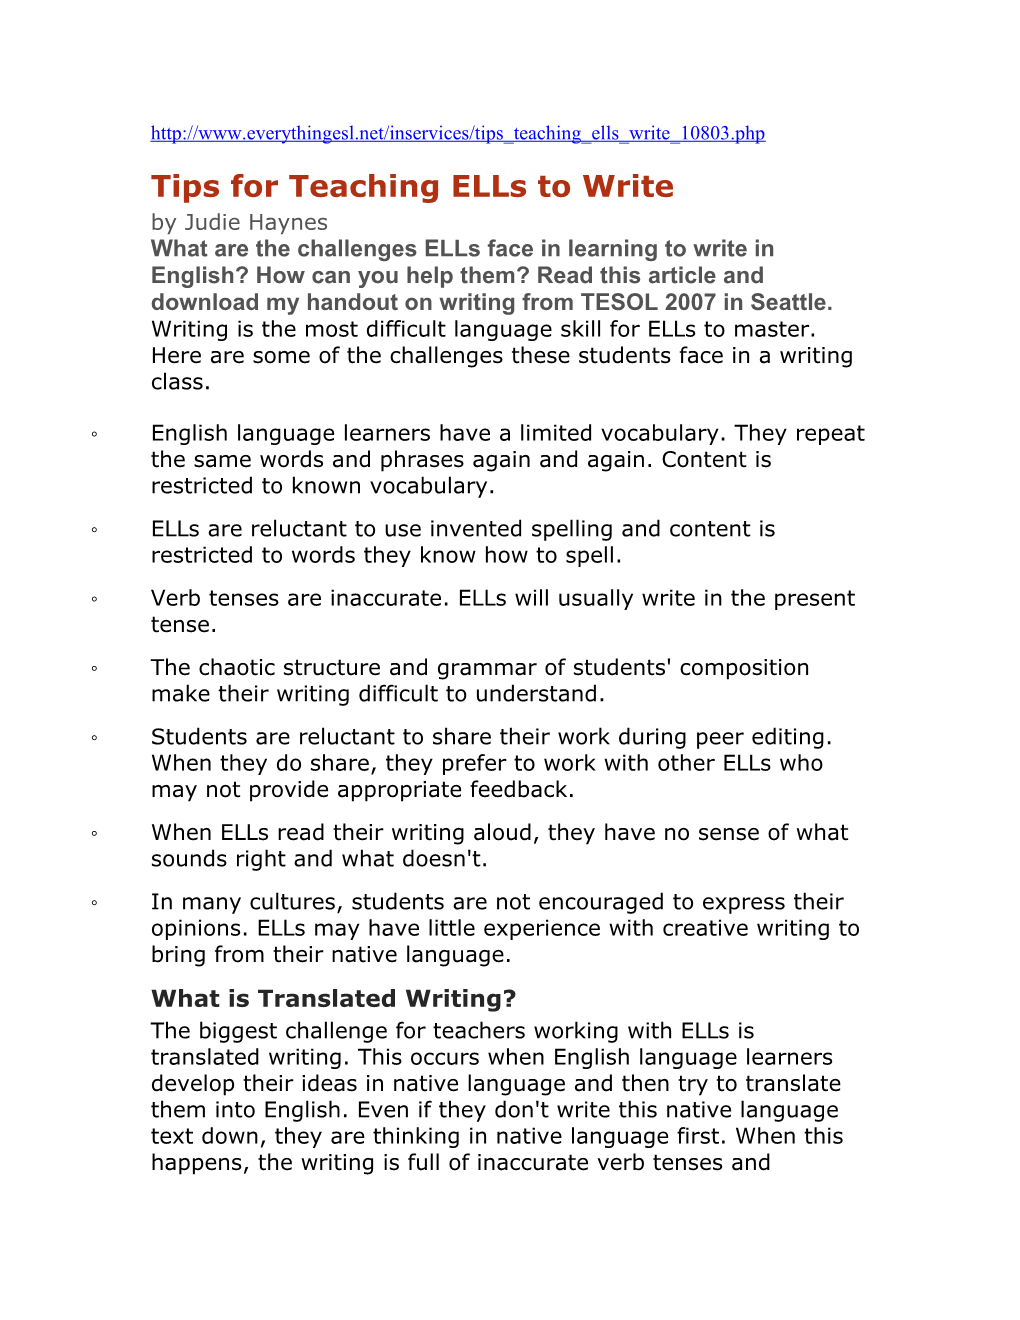 Tips for Teaching Ells to Write